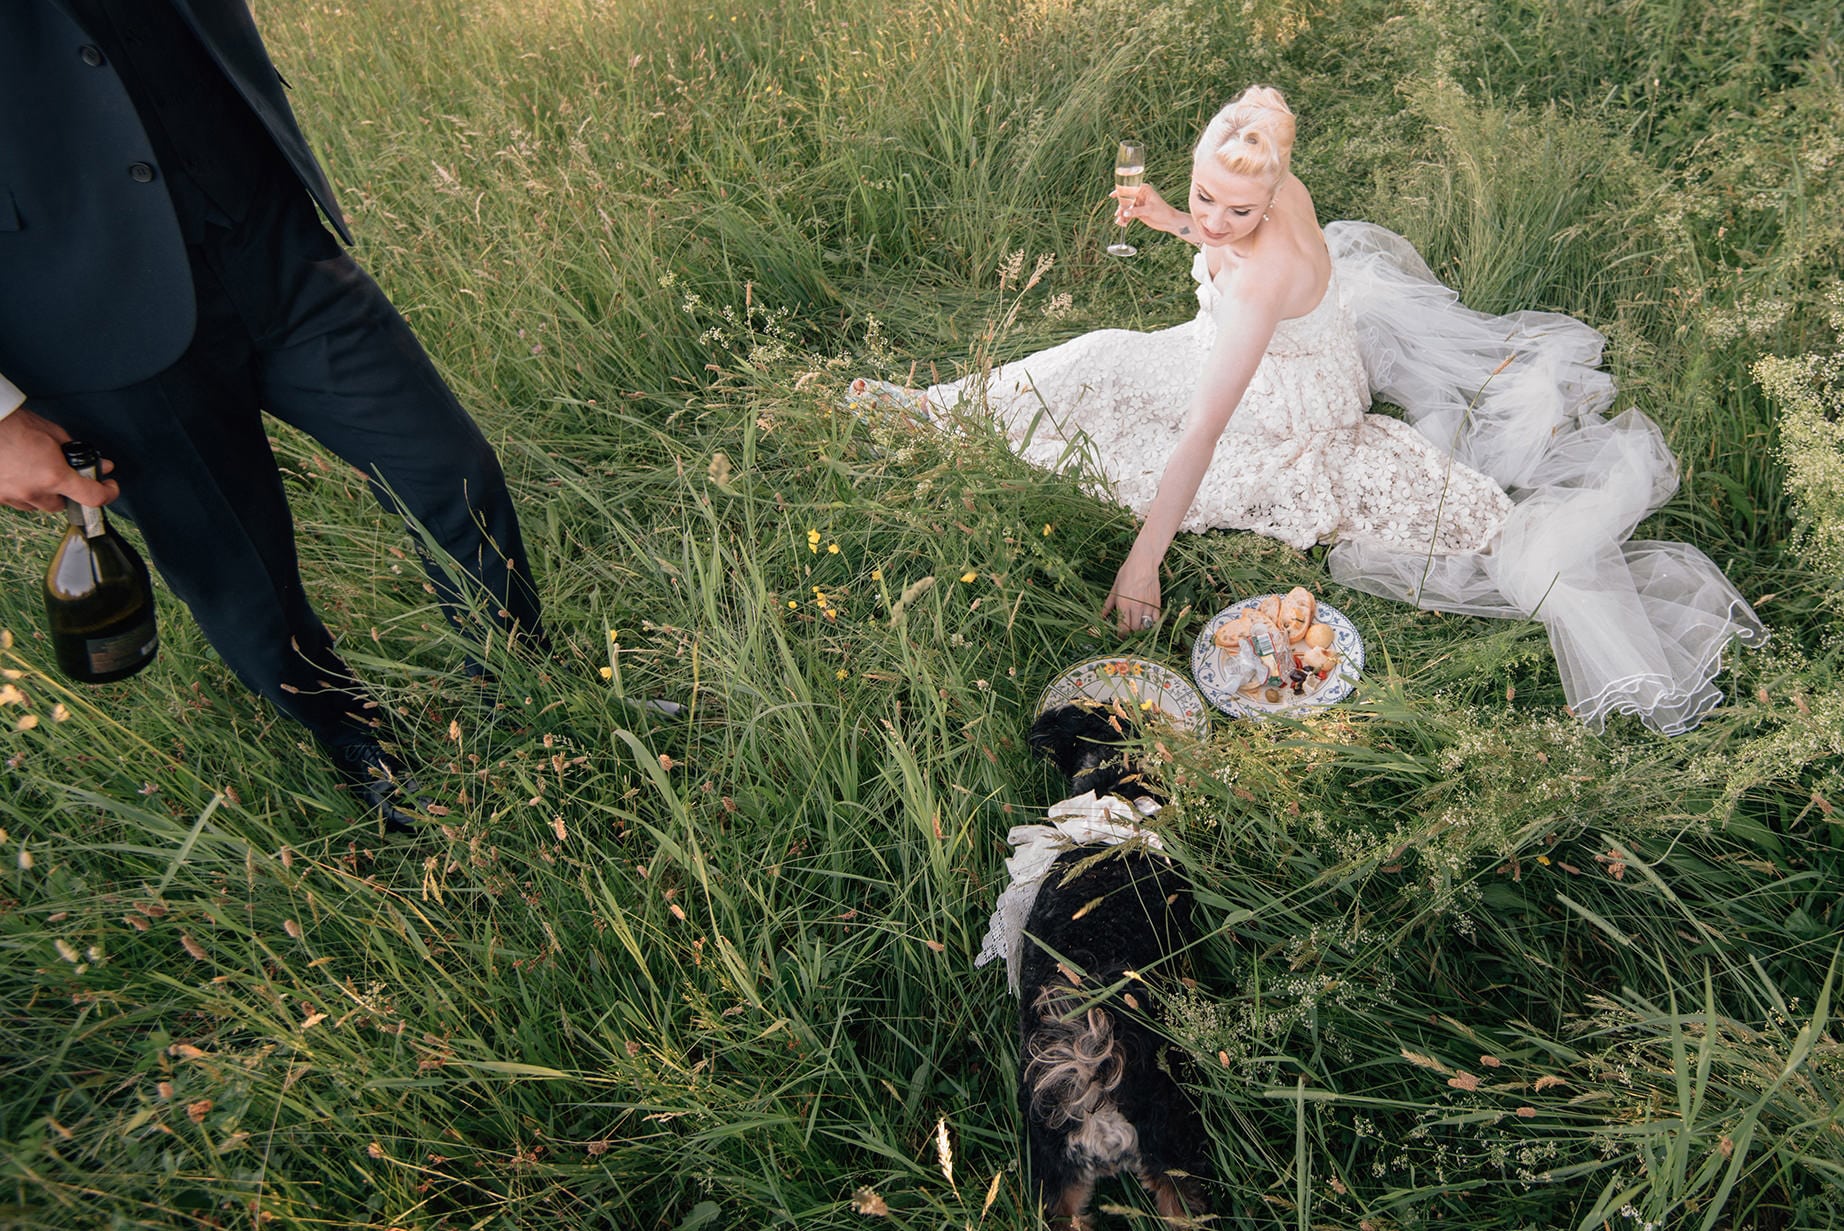 A Julie Pepin photo depicting a bride sits in a grassy field, holding a glass of champagne, next to two dinner plates. A small black dog eats from one of the dinner plates, and the bride reaches toward the dog. The groom stands nearby, holding a bottle of champgane.